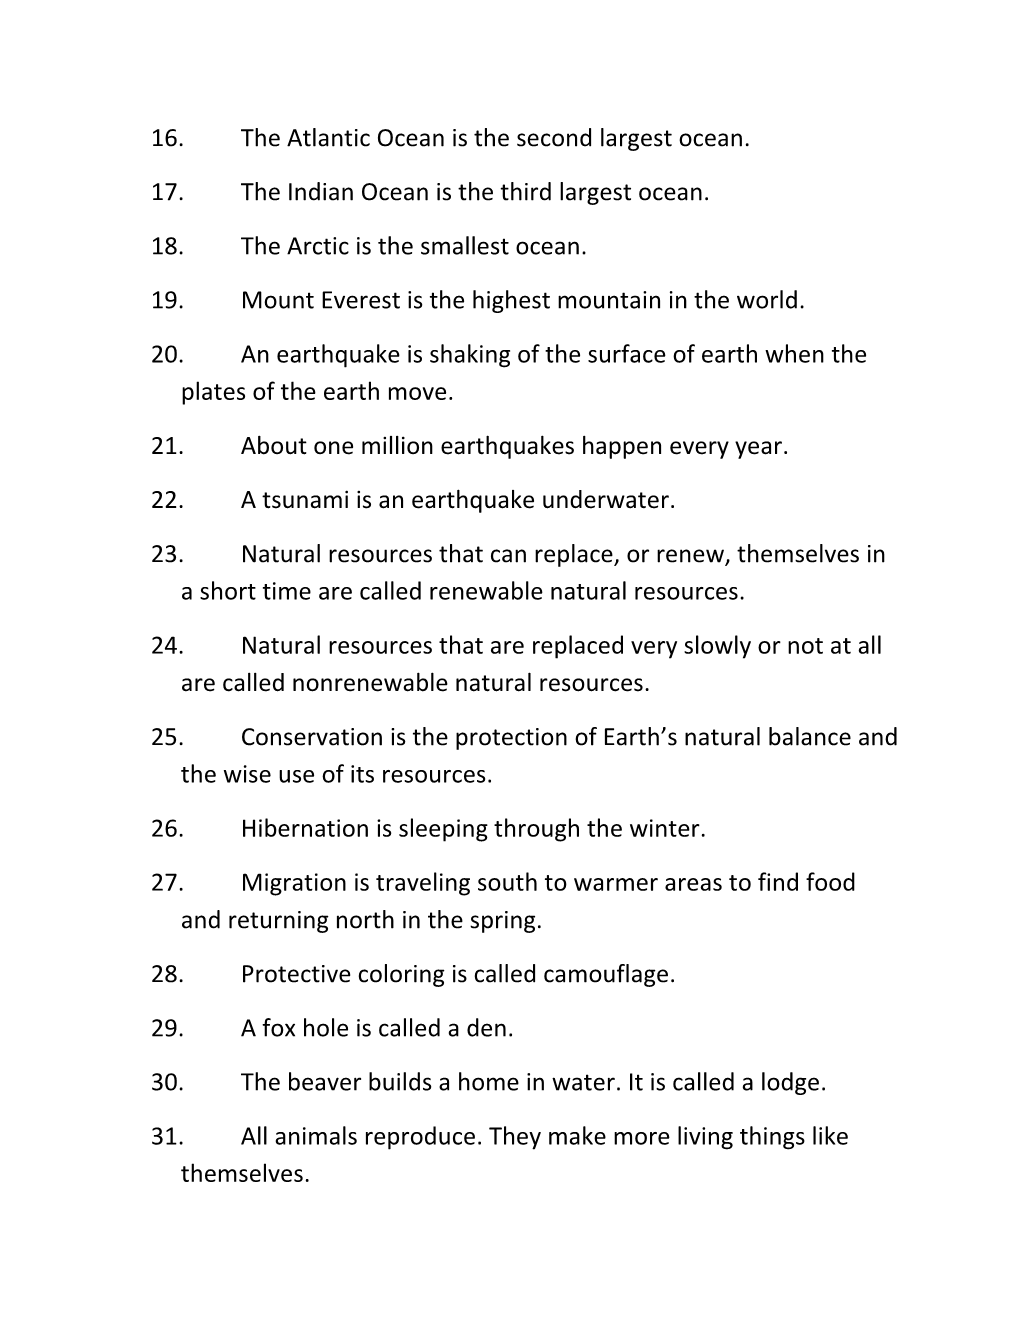 Science Semester Study Guide